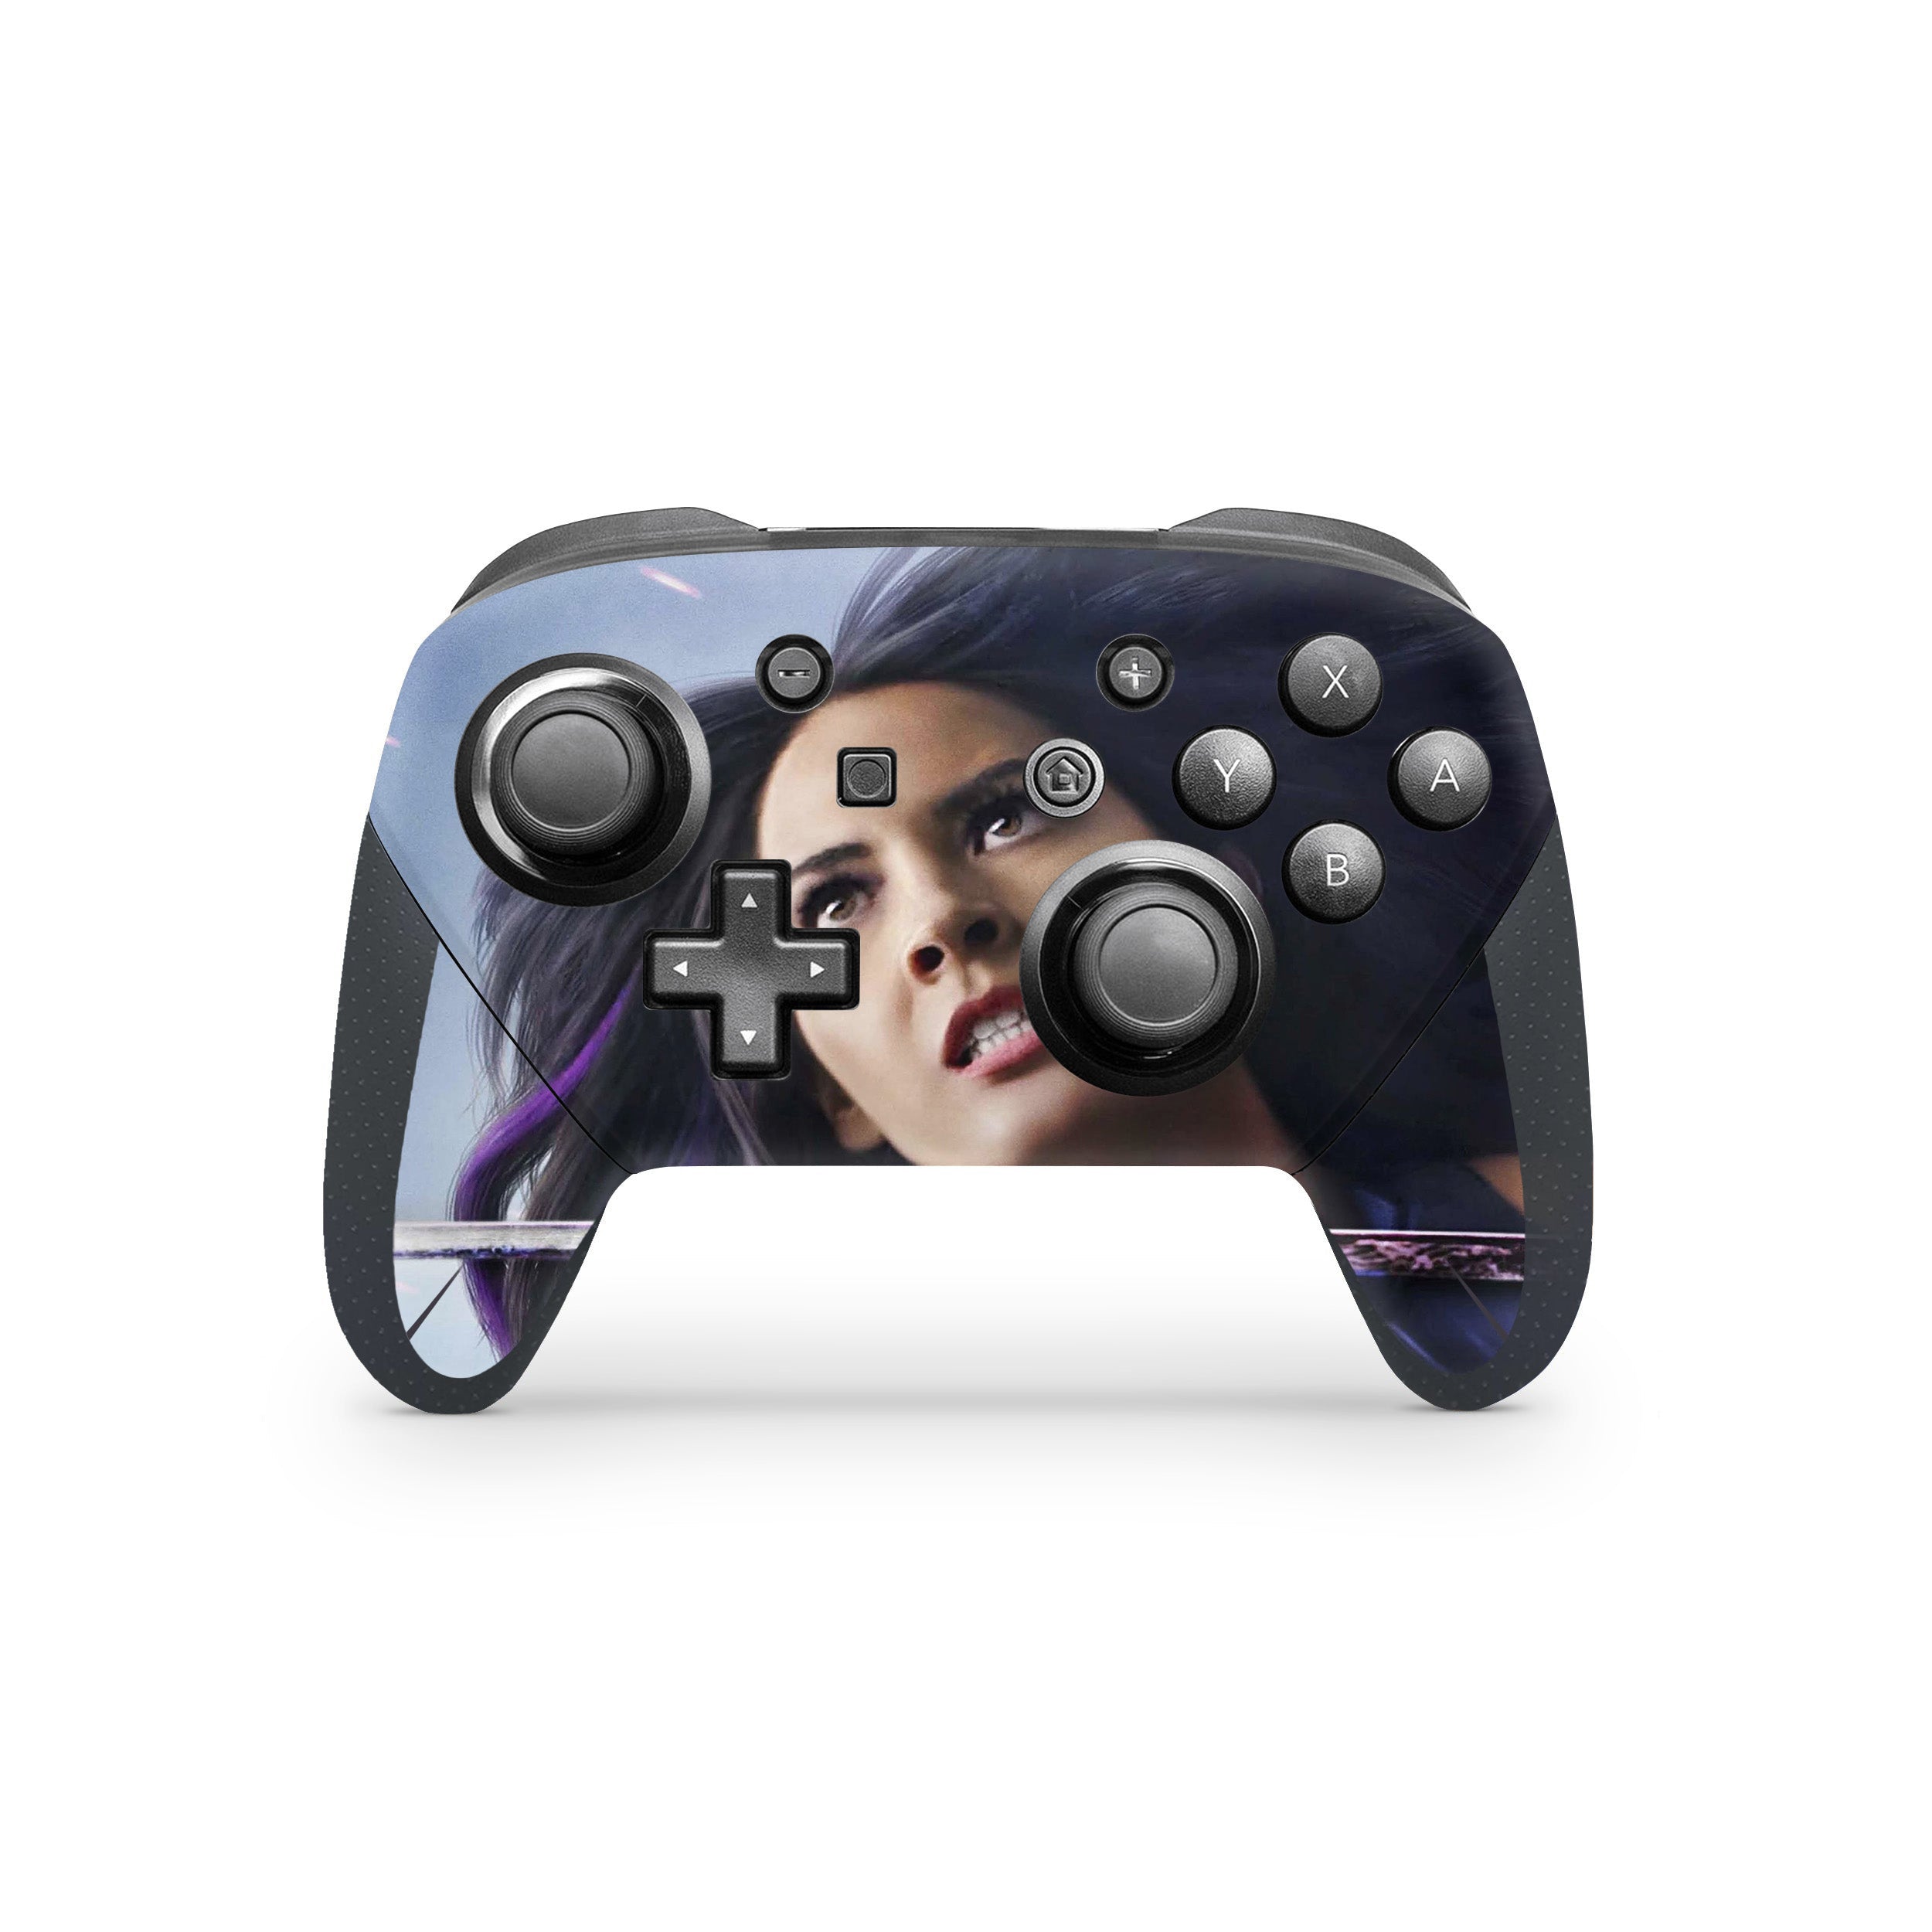 A video game skin featuring a Marvel X Men Psylocke design for the Switch Pro Controller.